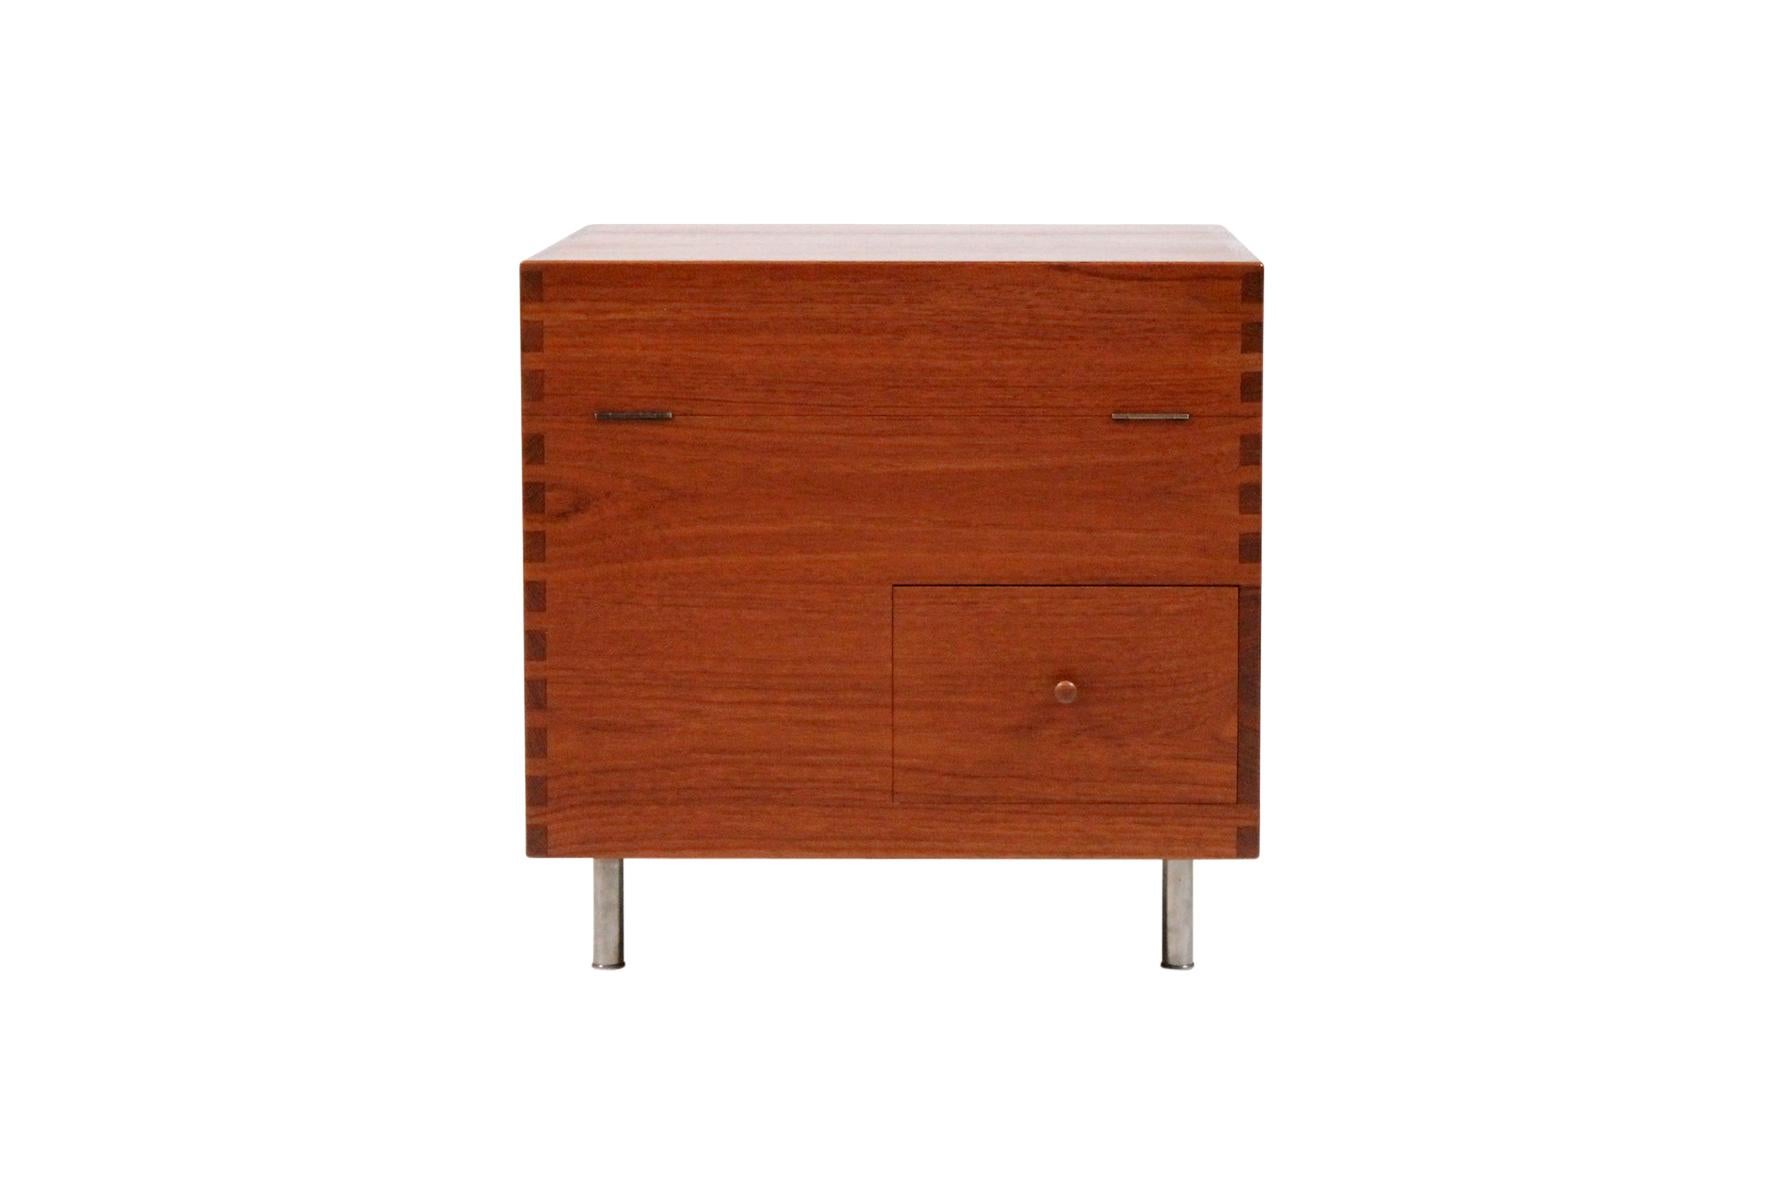 Hans Wegner teak cube bar crafted by Andreas Tuck, 1960s.

Hinged top and single drawer with exposed dovetail construction raised on chrome plate steel legs. In very good condition.